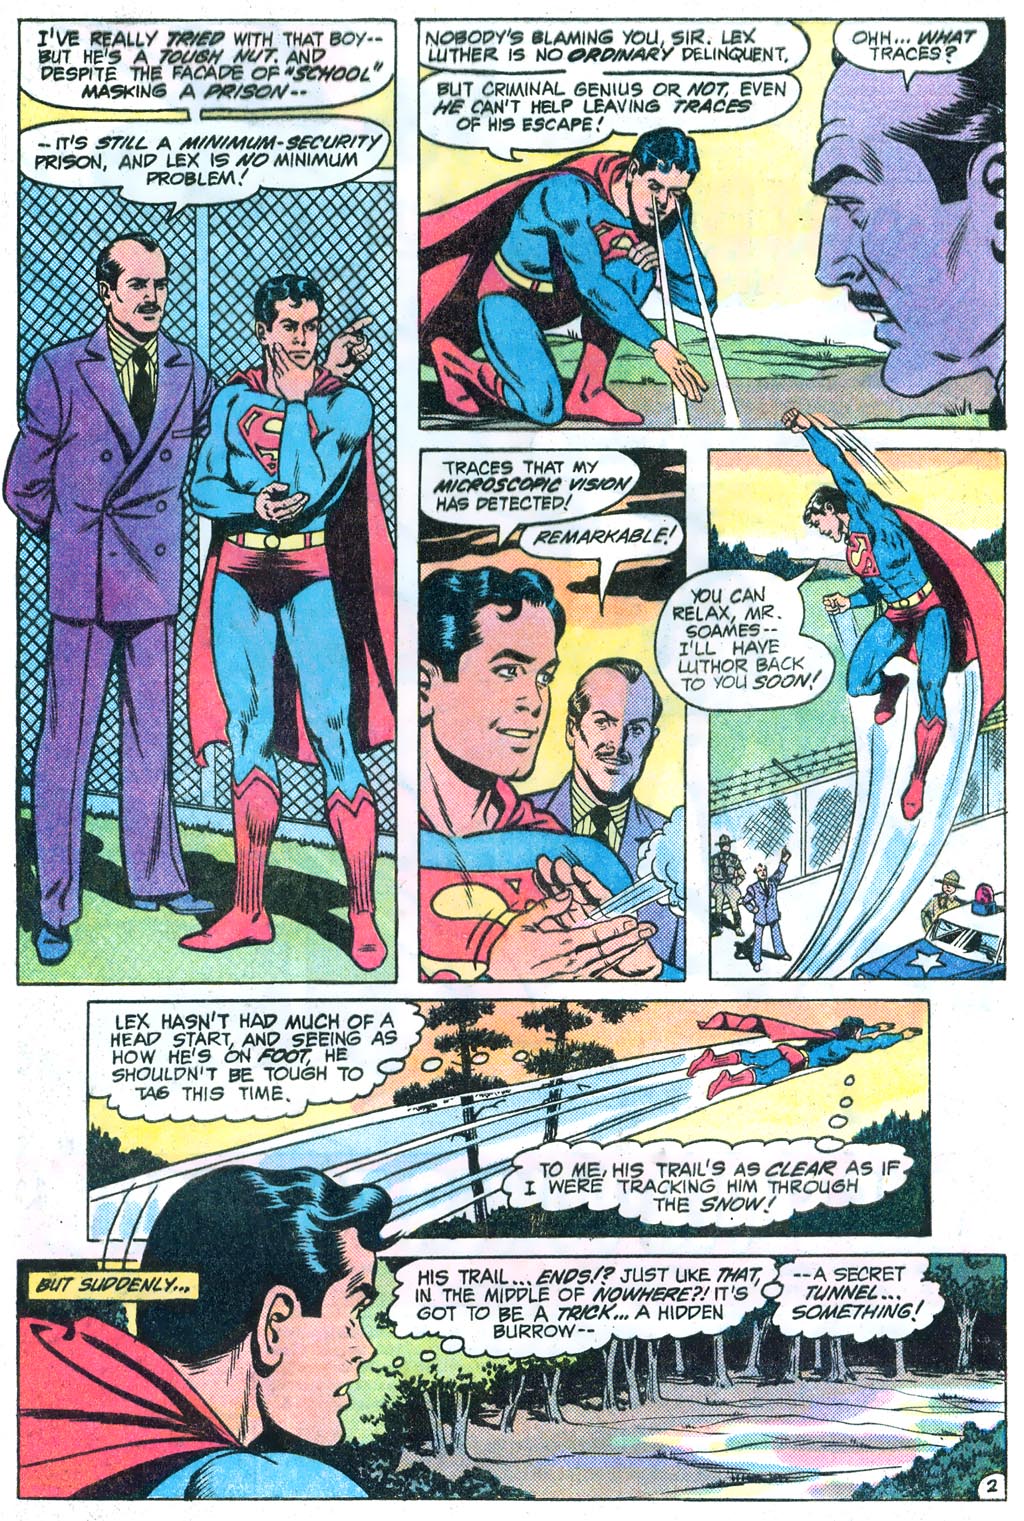 The New Adventures of Superboy 48 Page 3